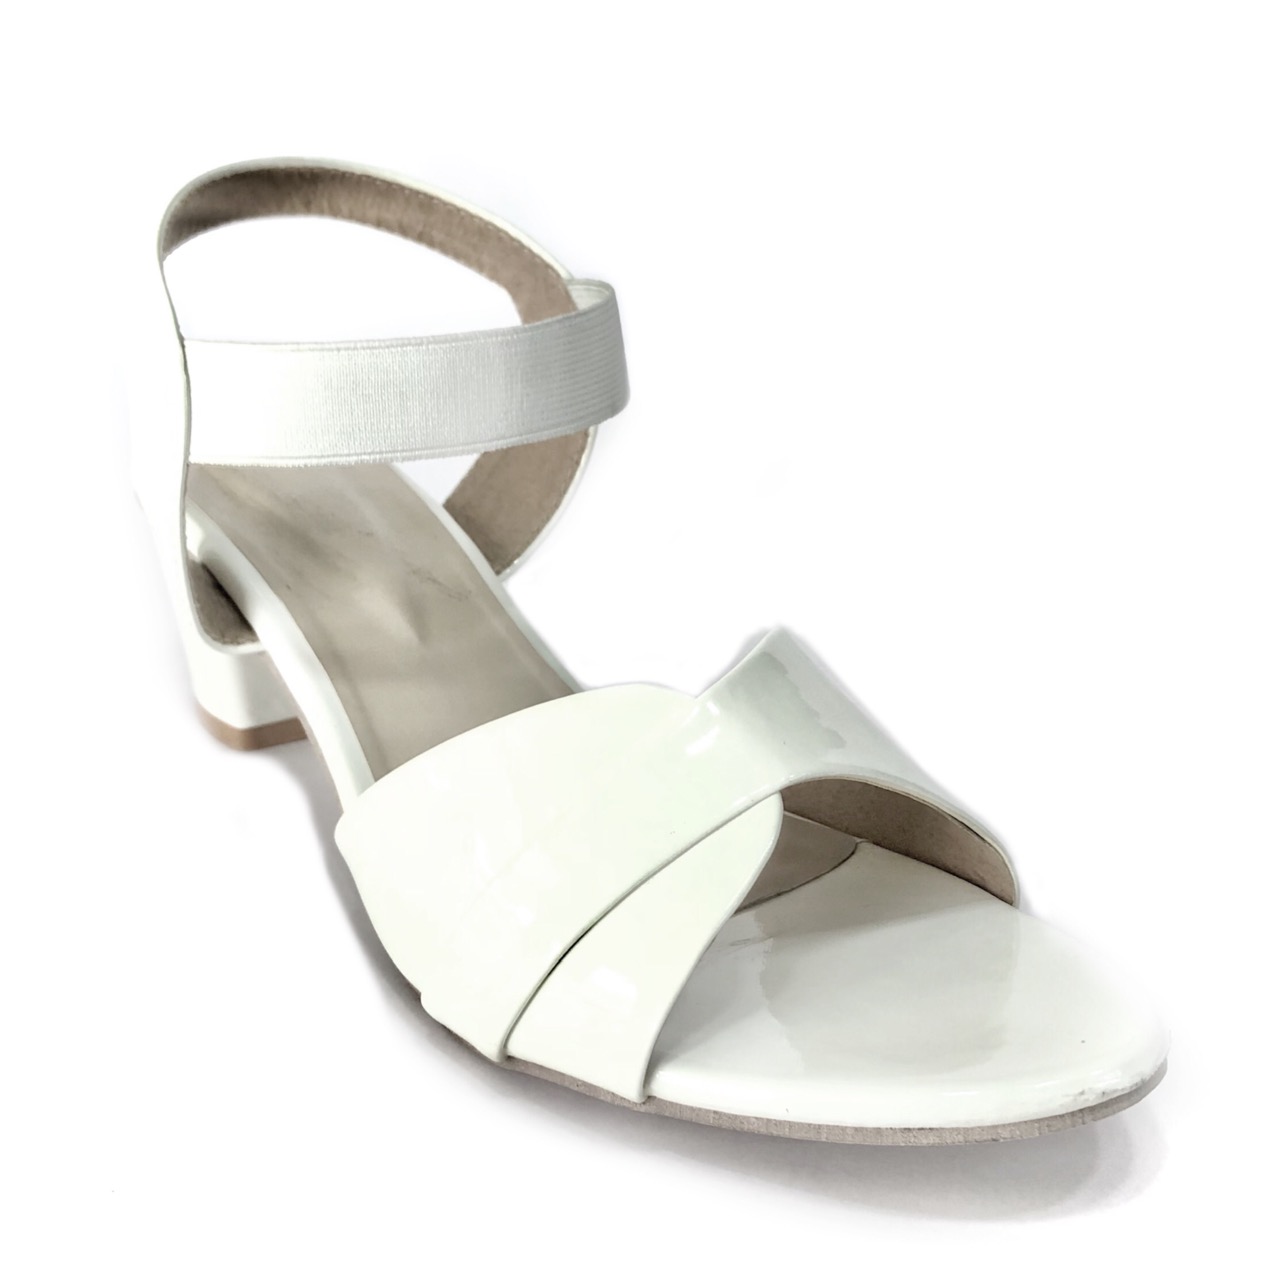 Women's High-Heel Sandals, Comfortable Flip-Flops, Wide-Fit, White-Colored  High-Heels, Monochromatic Slippers, Suitable For Various Occasions  Including Dress Shoes, Party Shoes, Formal Shoes, Dressy Sandals, Work  Shoes, Daily Slippers, And Flat Sandals